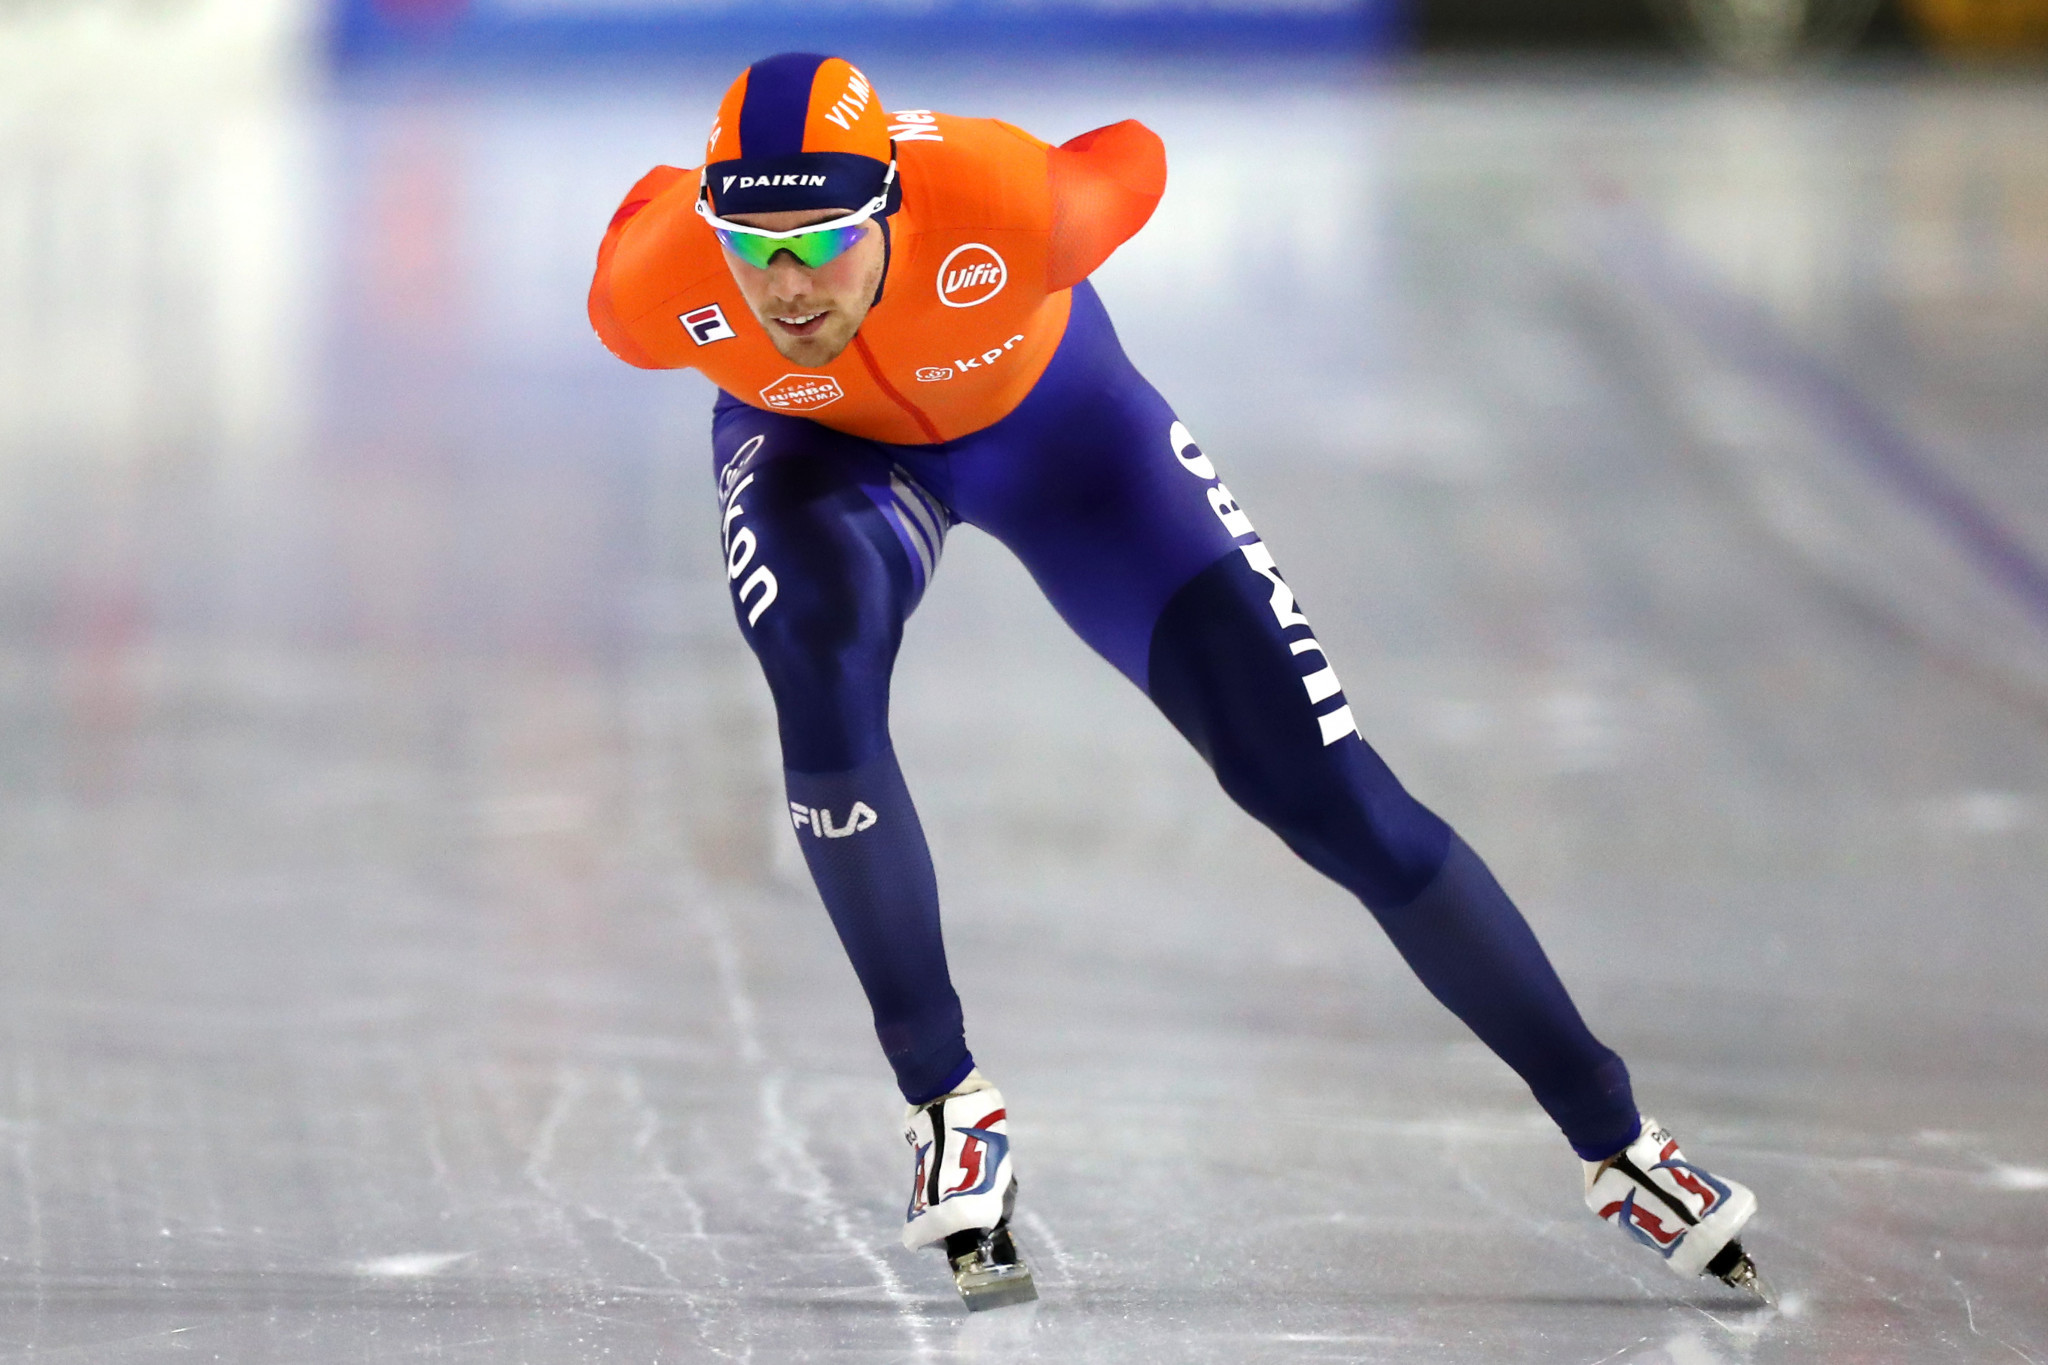 Inaugural World Sprint and World Allround Speed Skating Championships to begin in Hamar